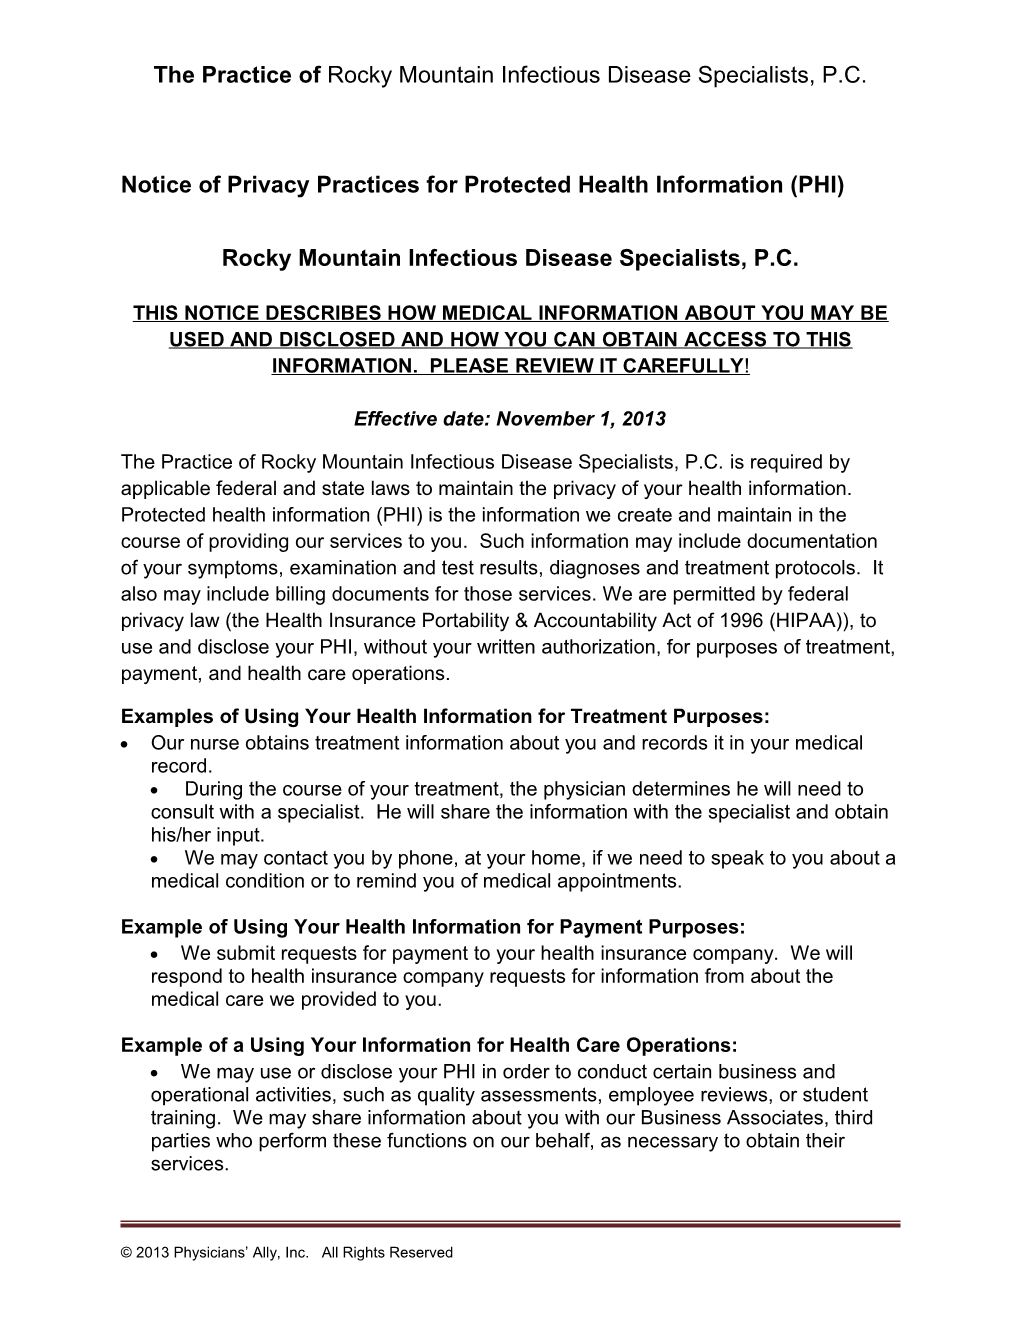 Notice of Privacy Practices for Protected Health Information (PHI)